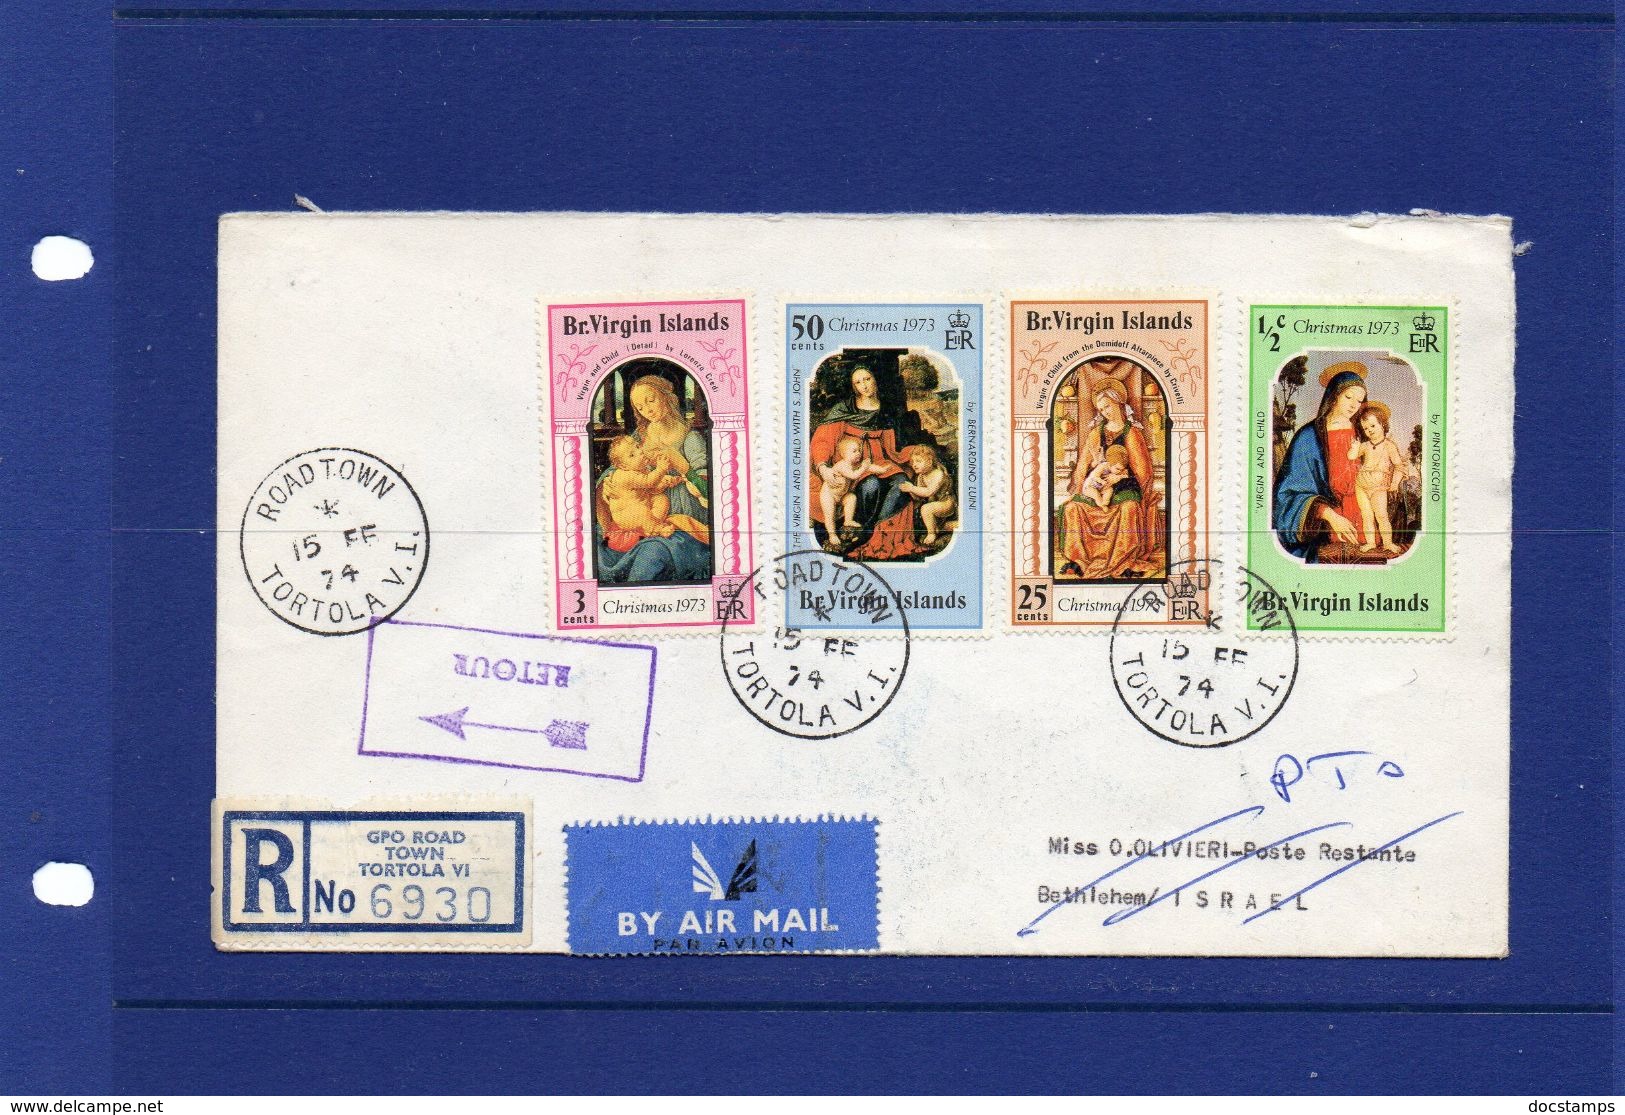 POSTAL HISTORY  15 - 2 -1974 TORTOLA -   AIRMAIL REGISTERED  COVER TO ISRAEL RTS TO ITALY - British Virgin Islands